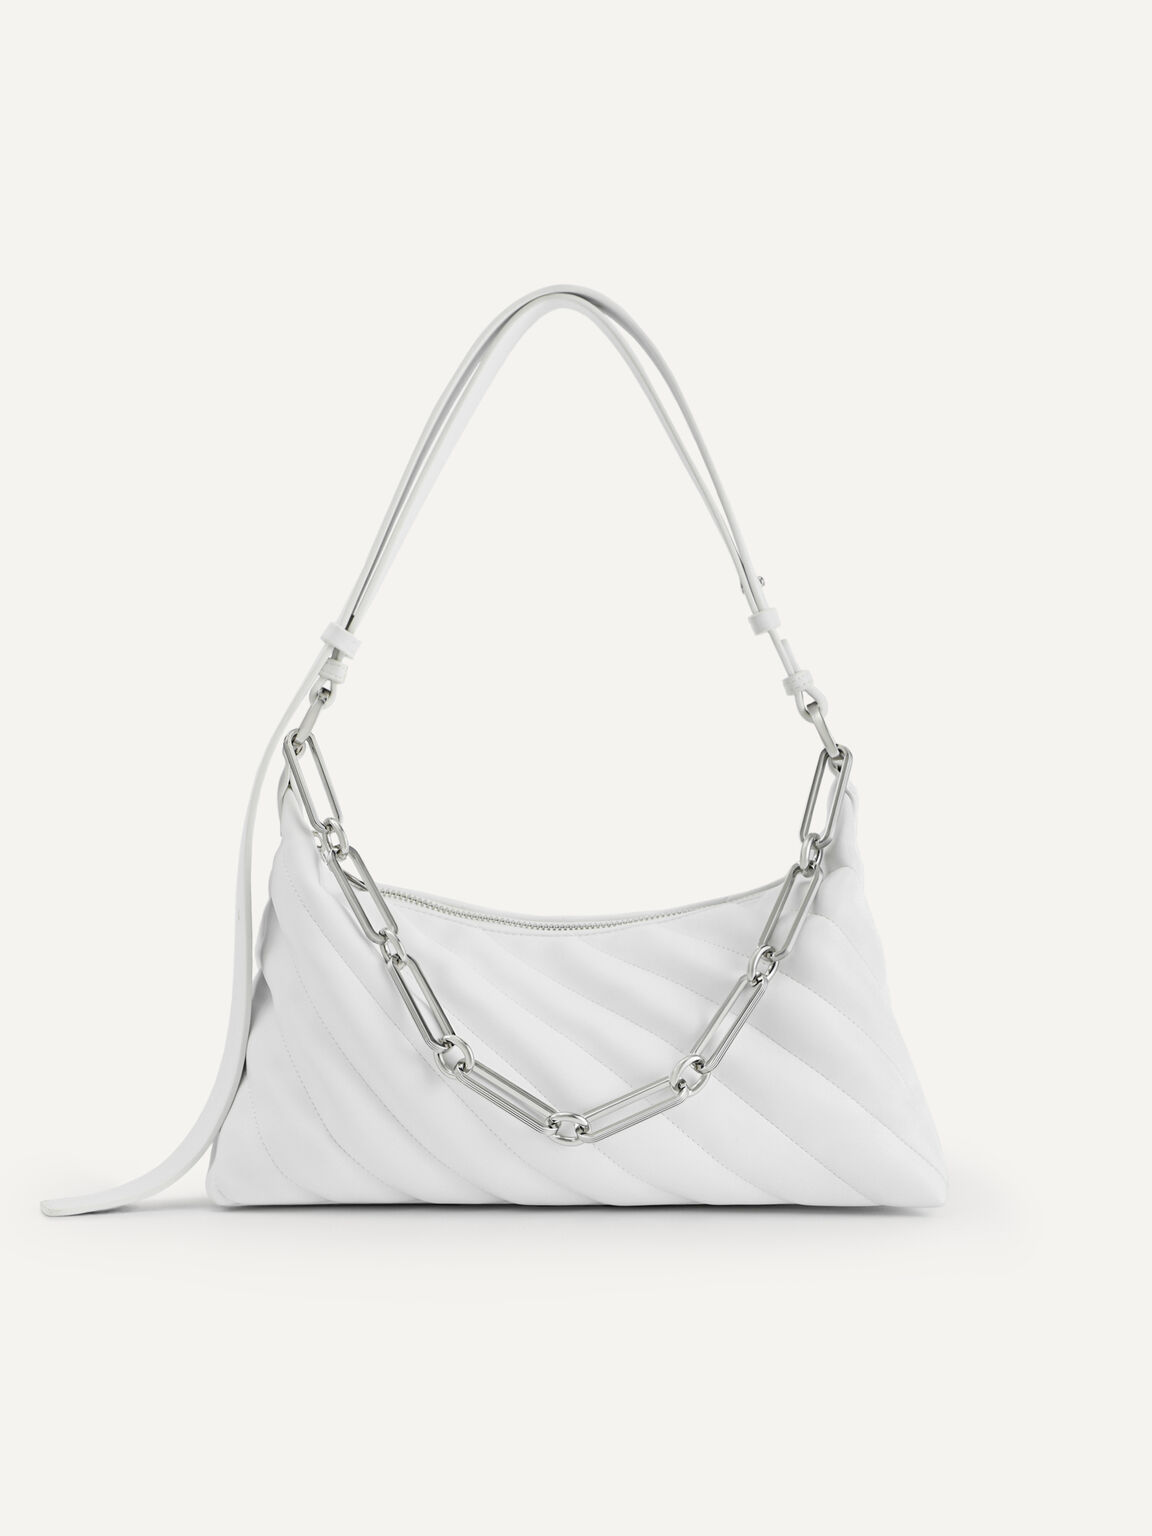 Quilted Shoulder Bag with Chain Strap, White